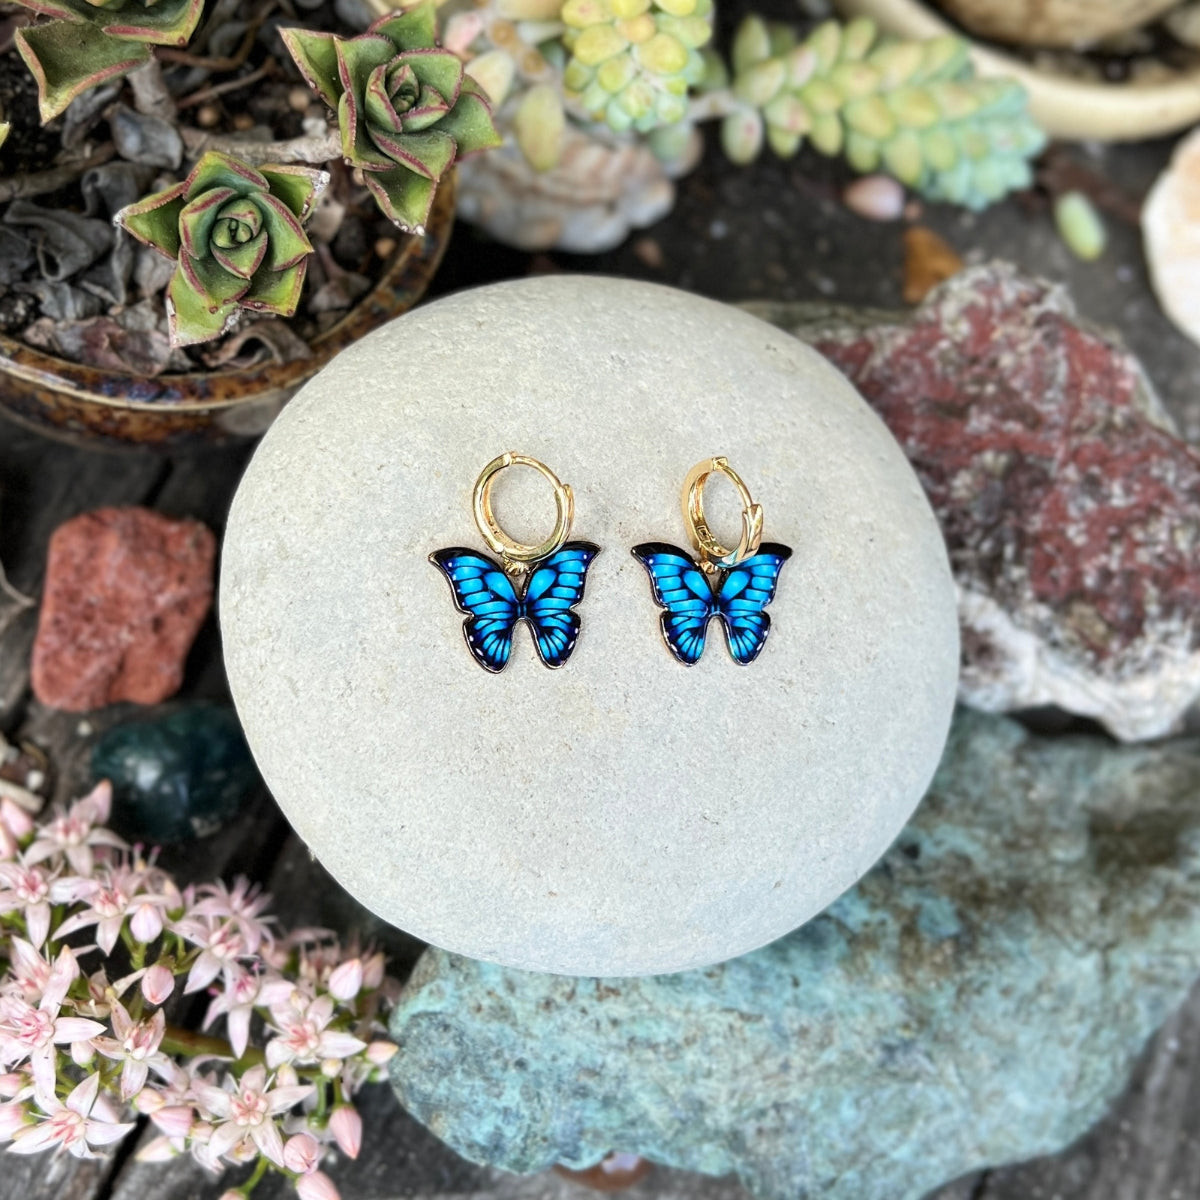 Let the "Joyful Butterfly Dance Earrings" be your mindful companions, encouraging you to dance through life with the carefree spirit of a butterfly. 